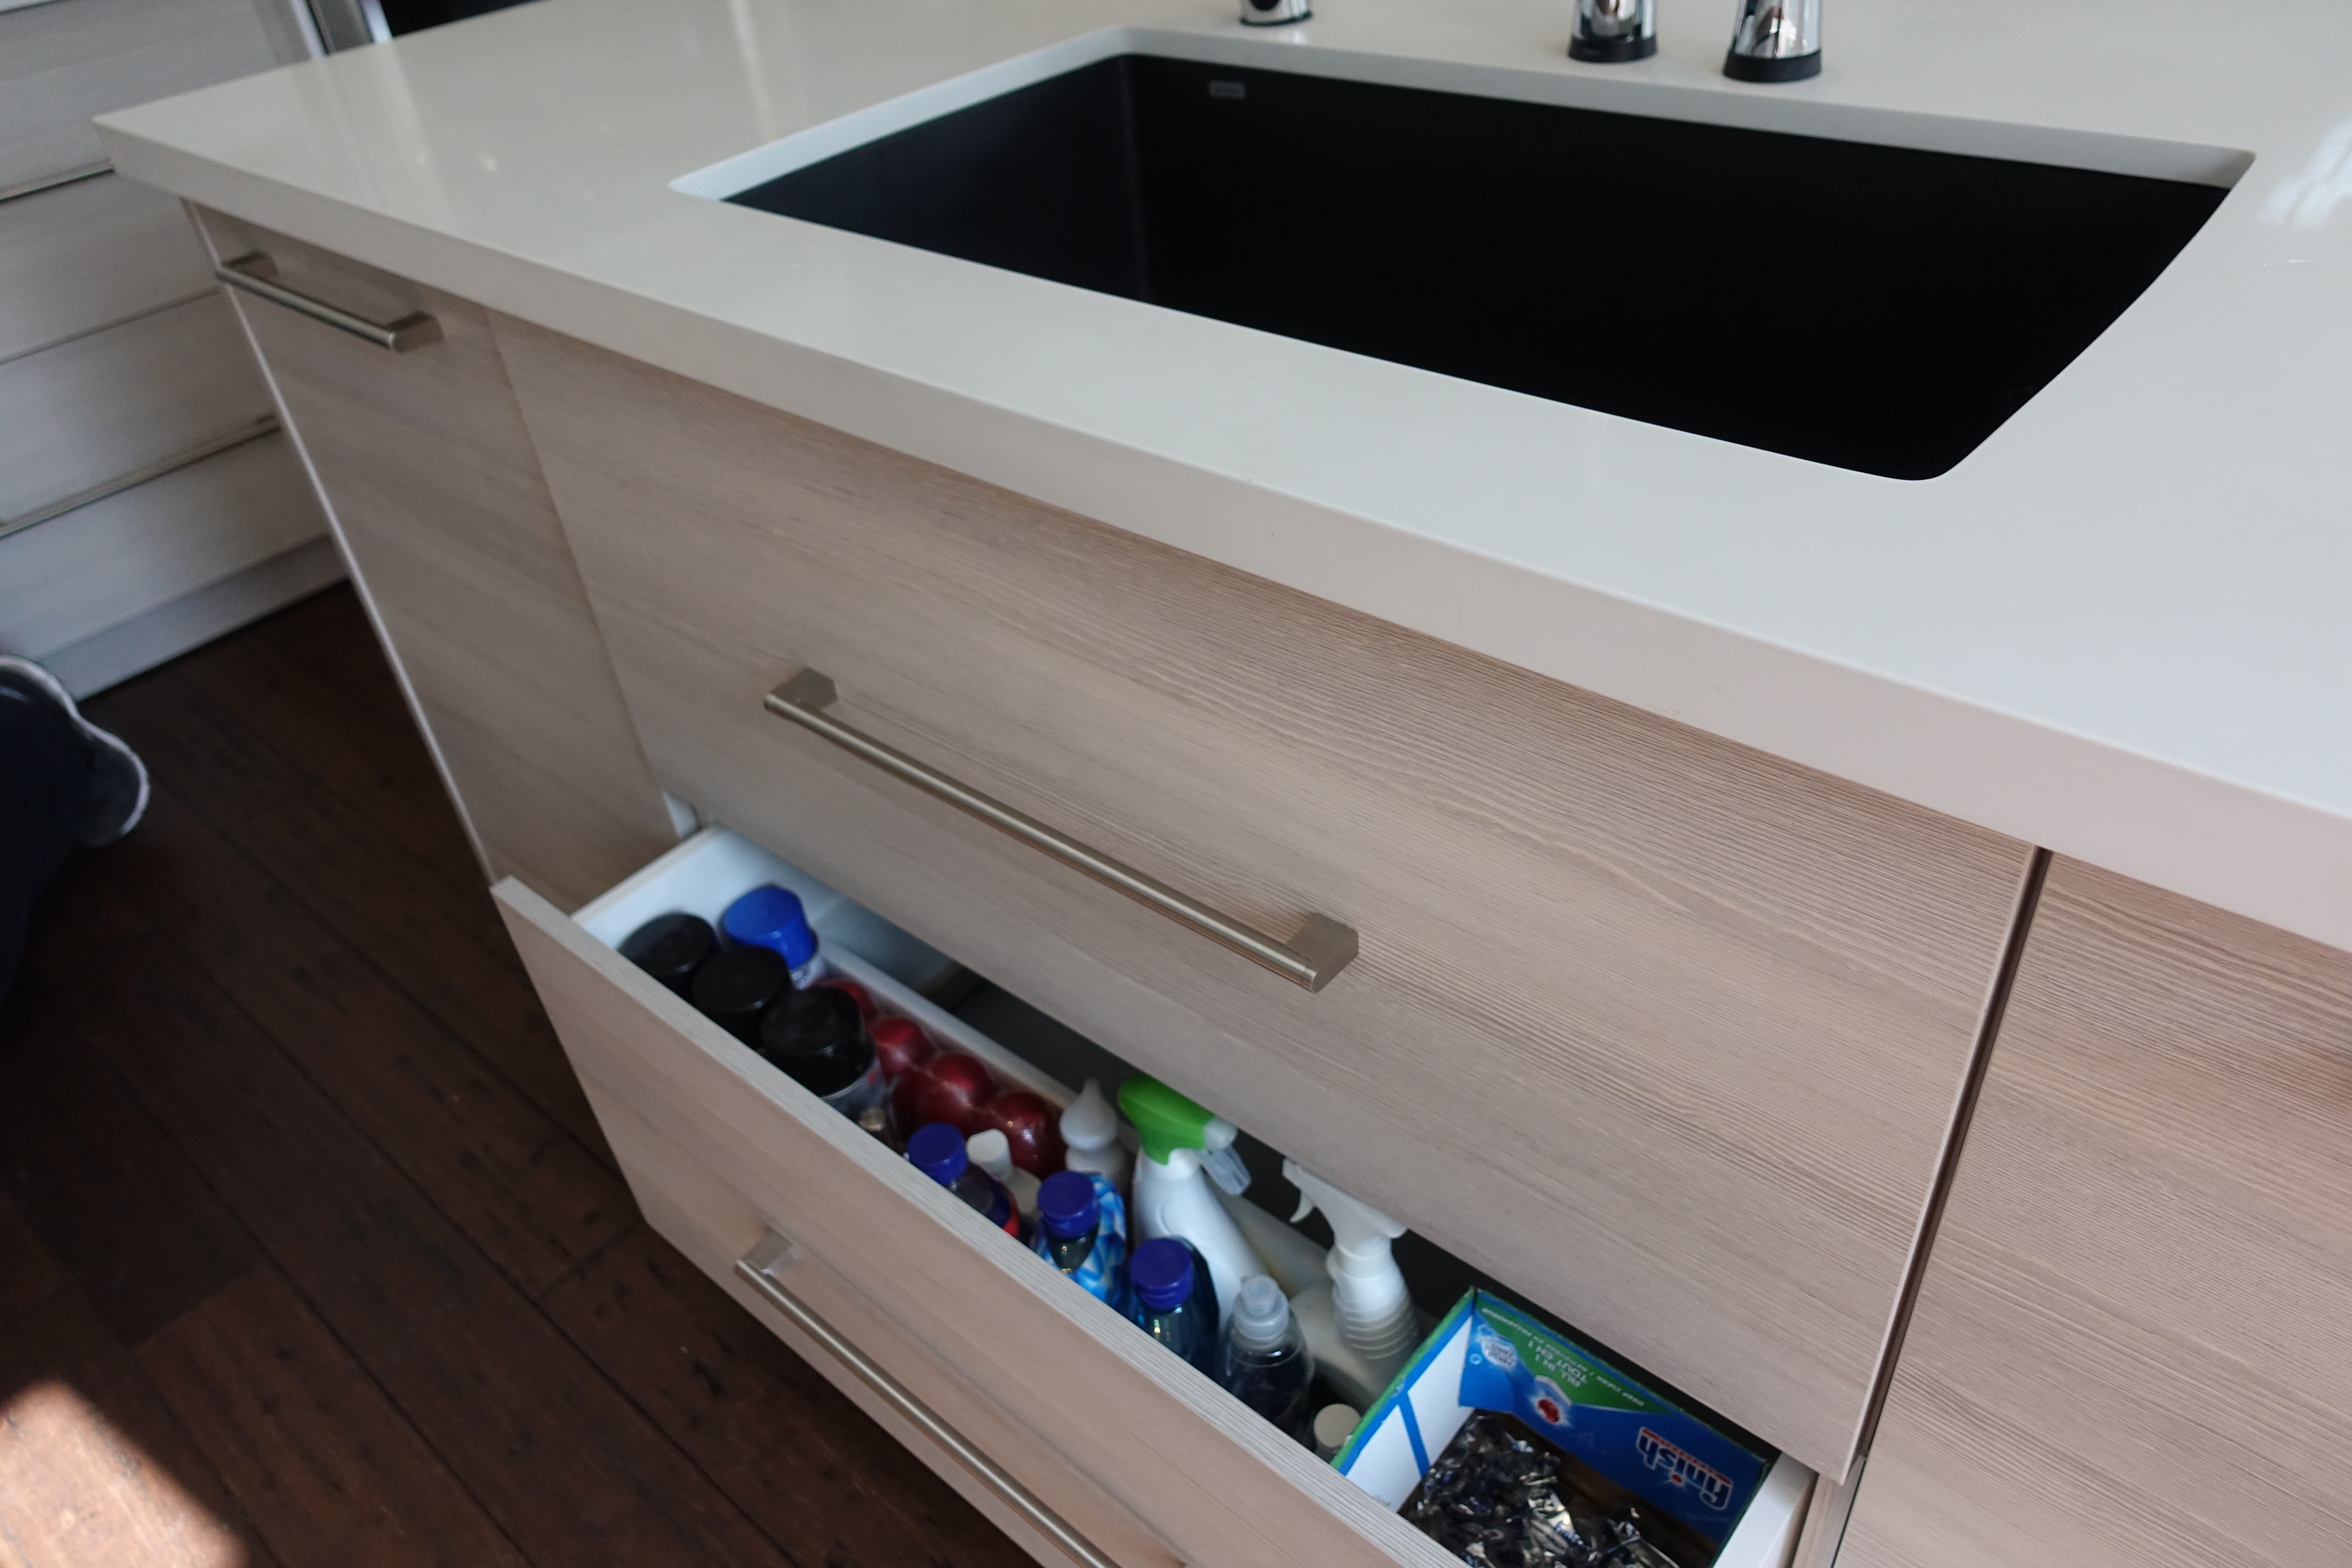 DRAWERS AND MORE DRAWERS | Homey Kitchen Cabinet Design Inc